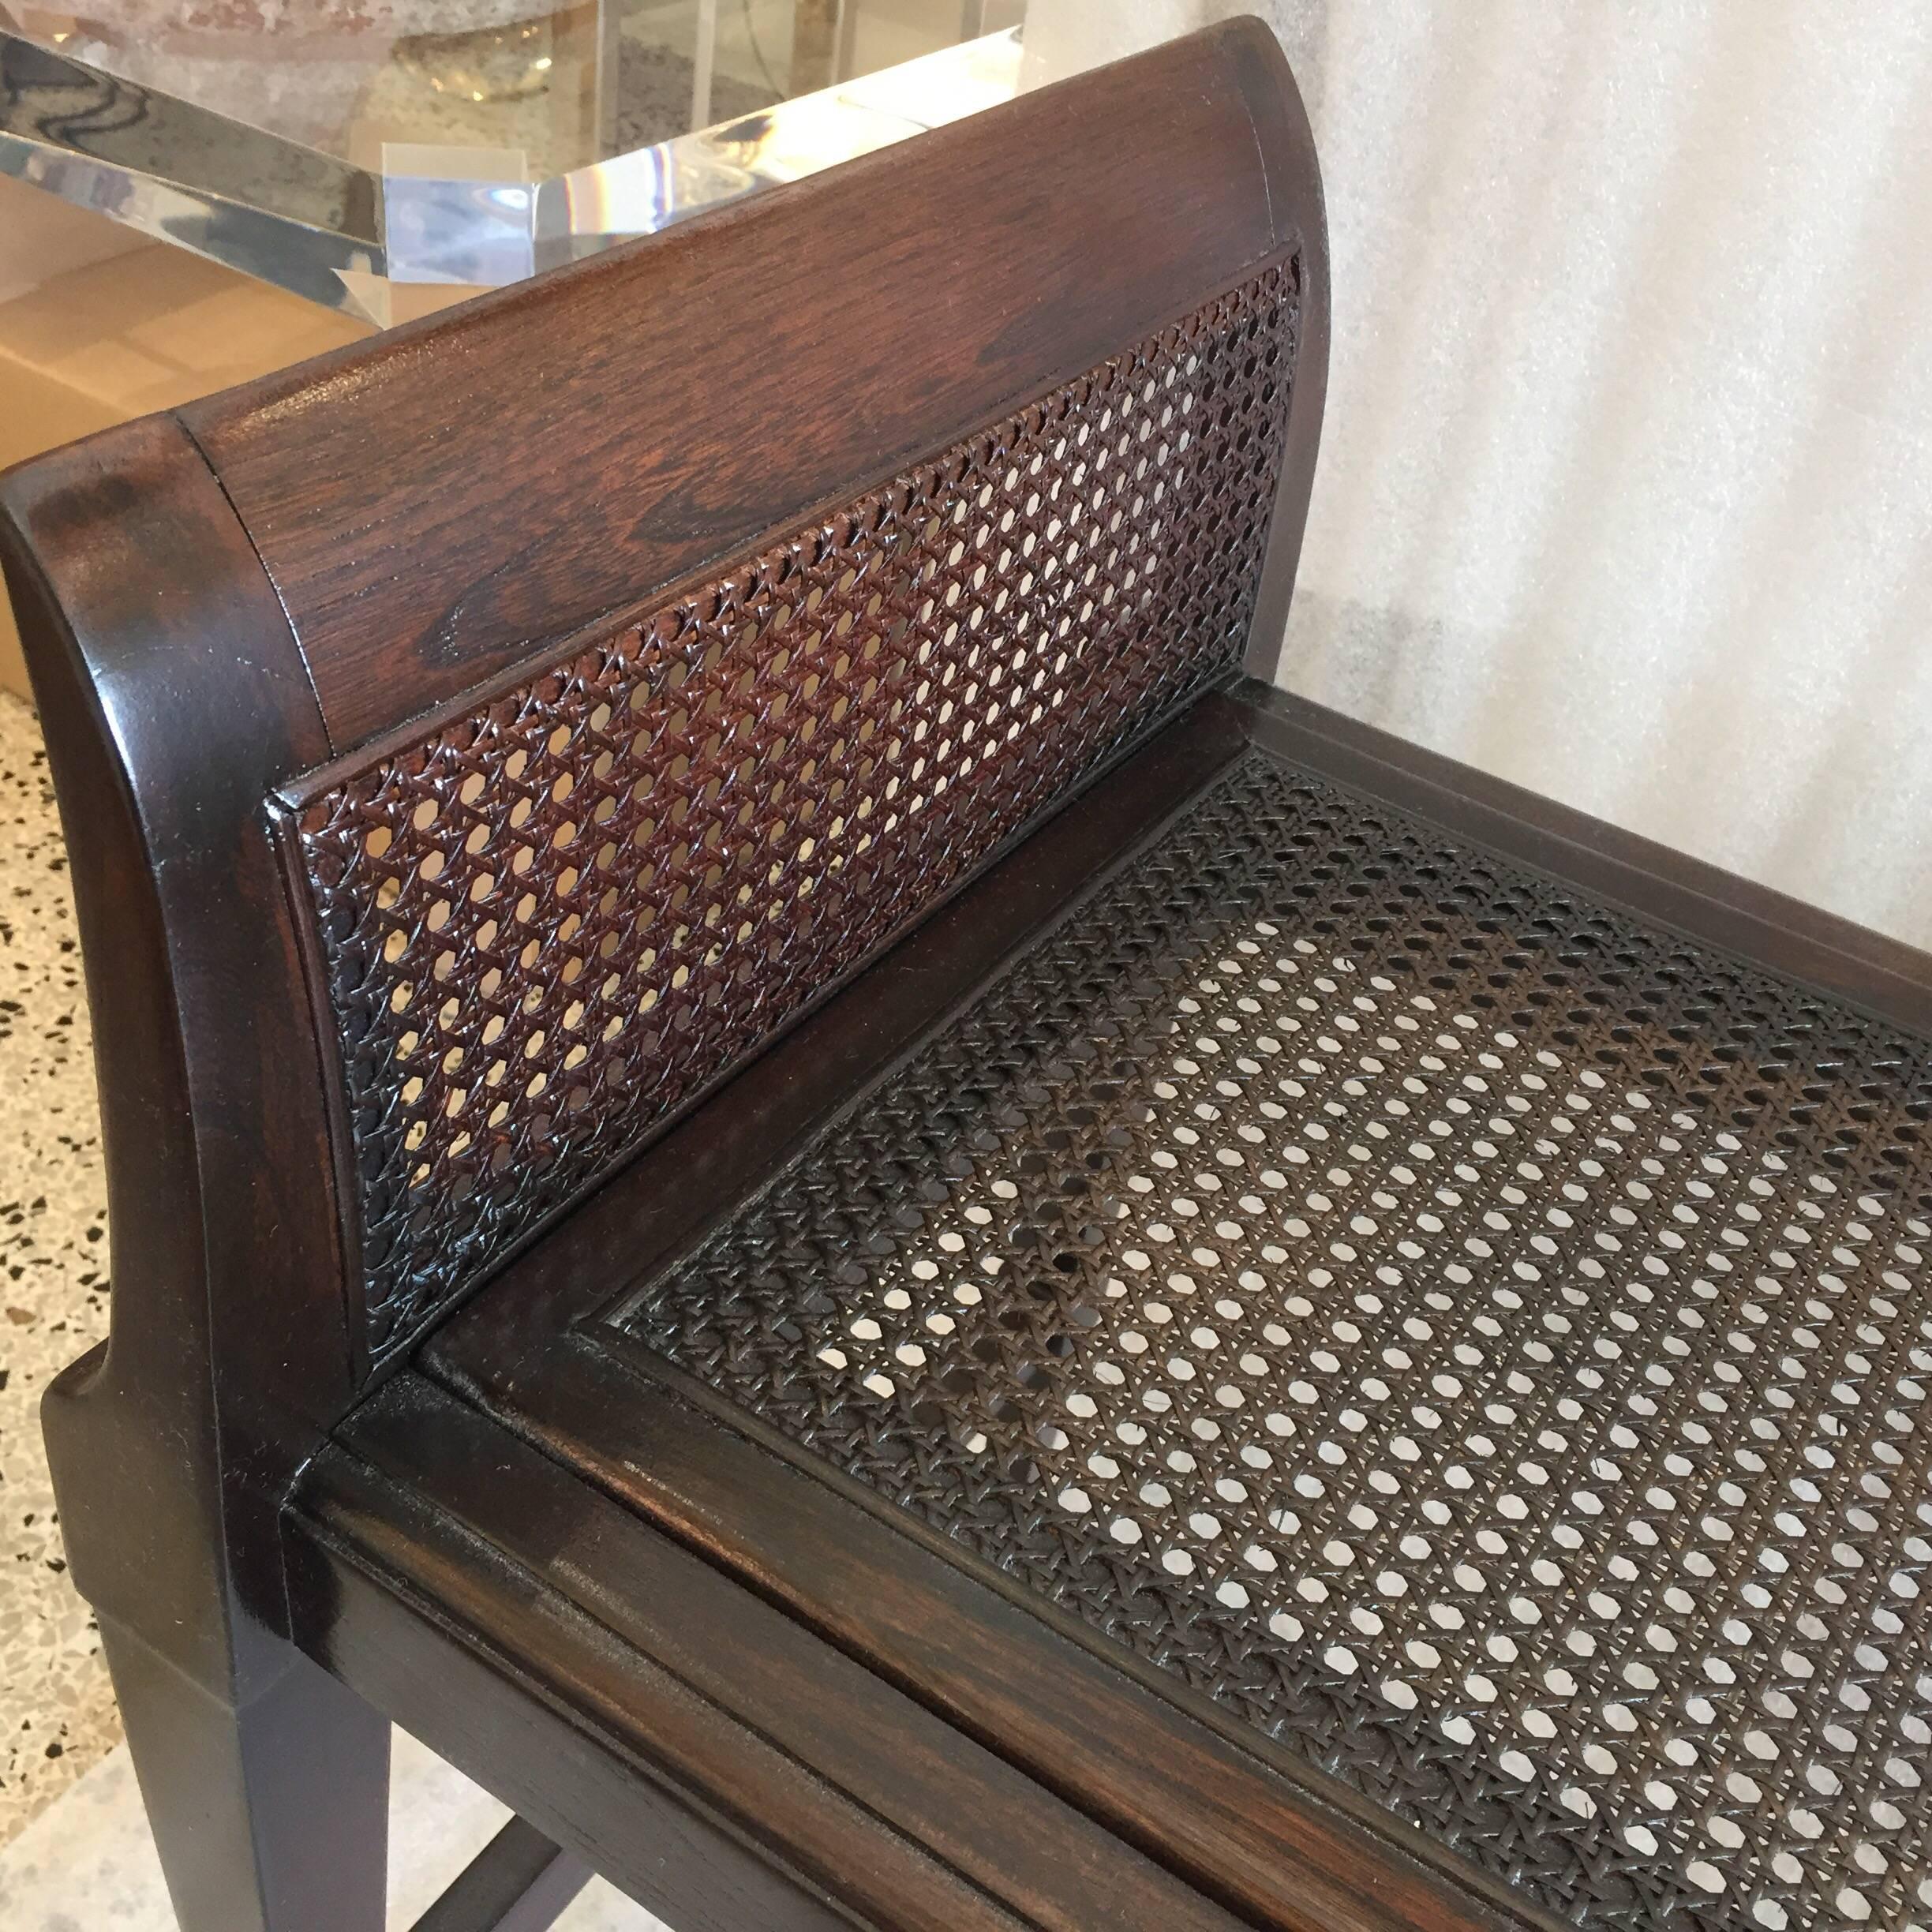 This is an amazing bench with so many details to enjoy. The rich dark stain is very clean and without issue, the cane sides and seat are strong and no breaks. The feet and stretcher are Art Deco treasures. See all detail images.